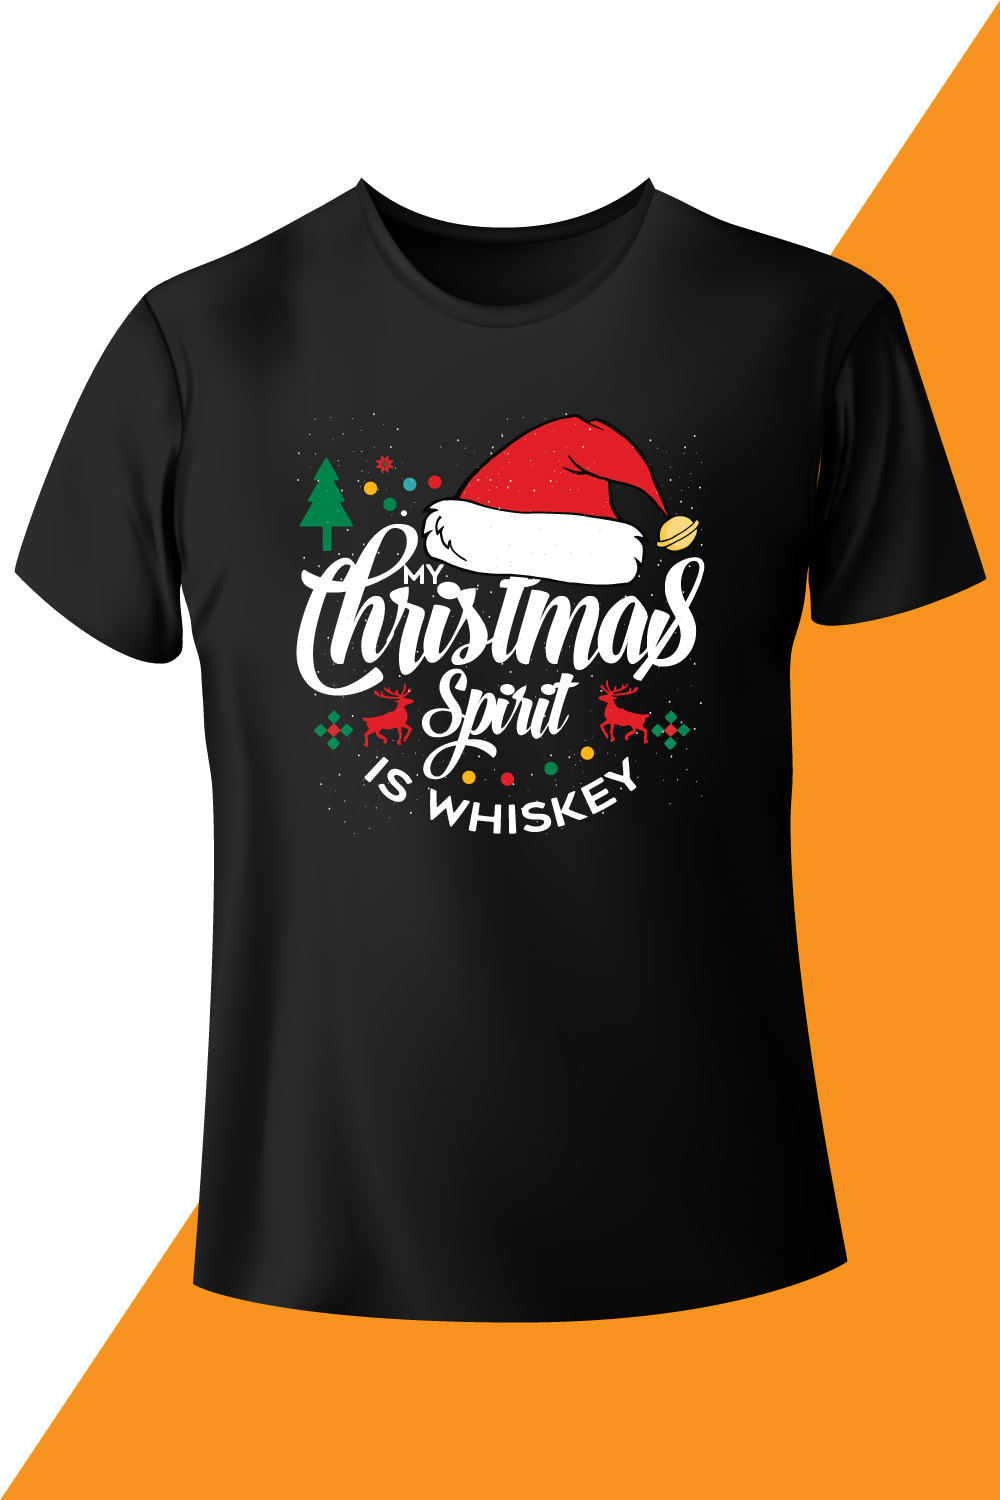 Image of a black t-shirt with a unique inscription my christmas spirit is whiskey.